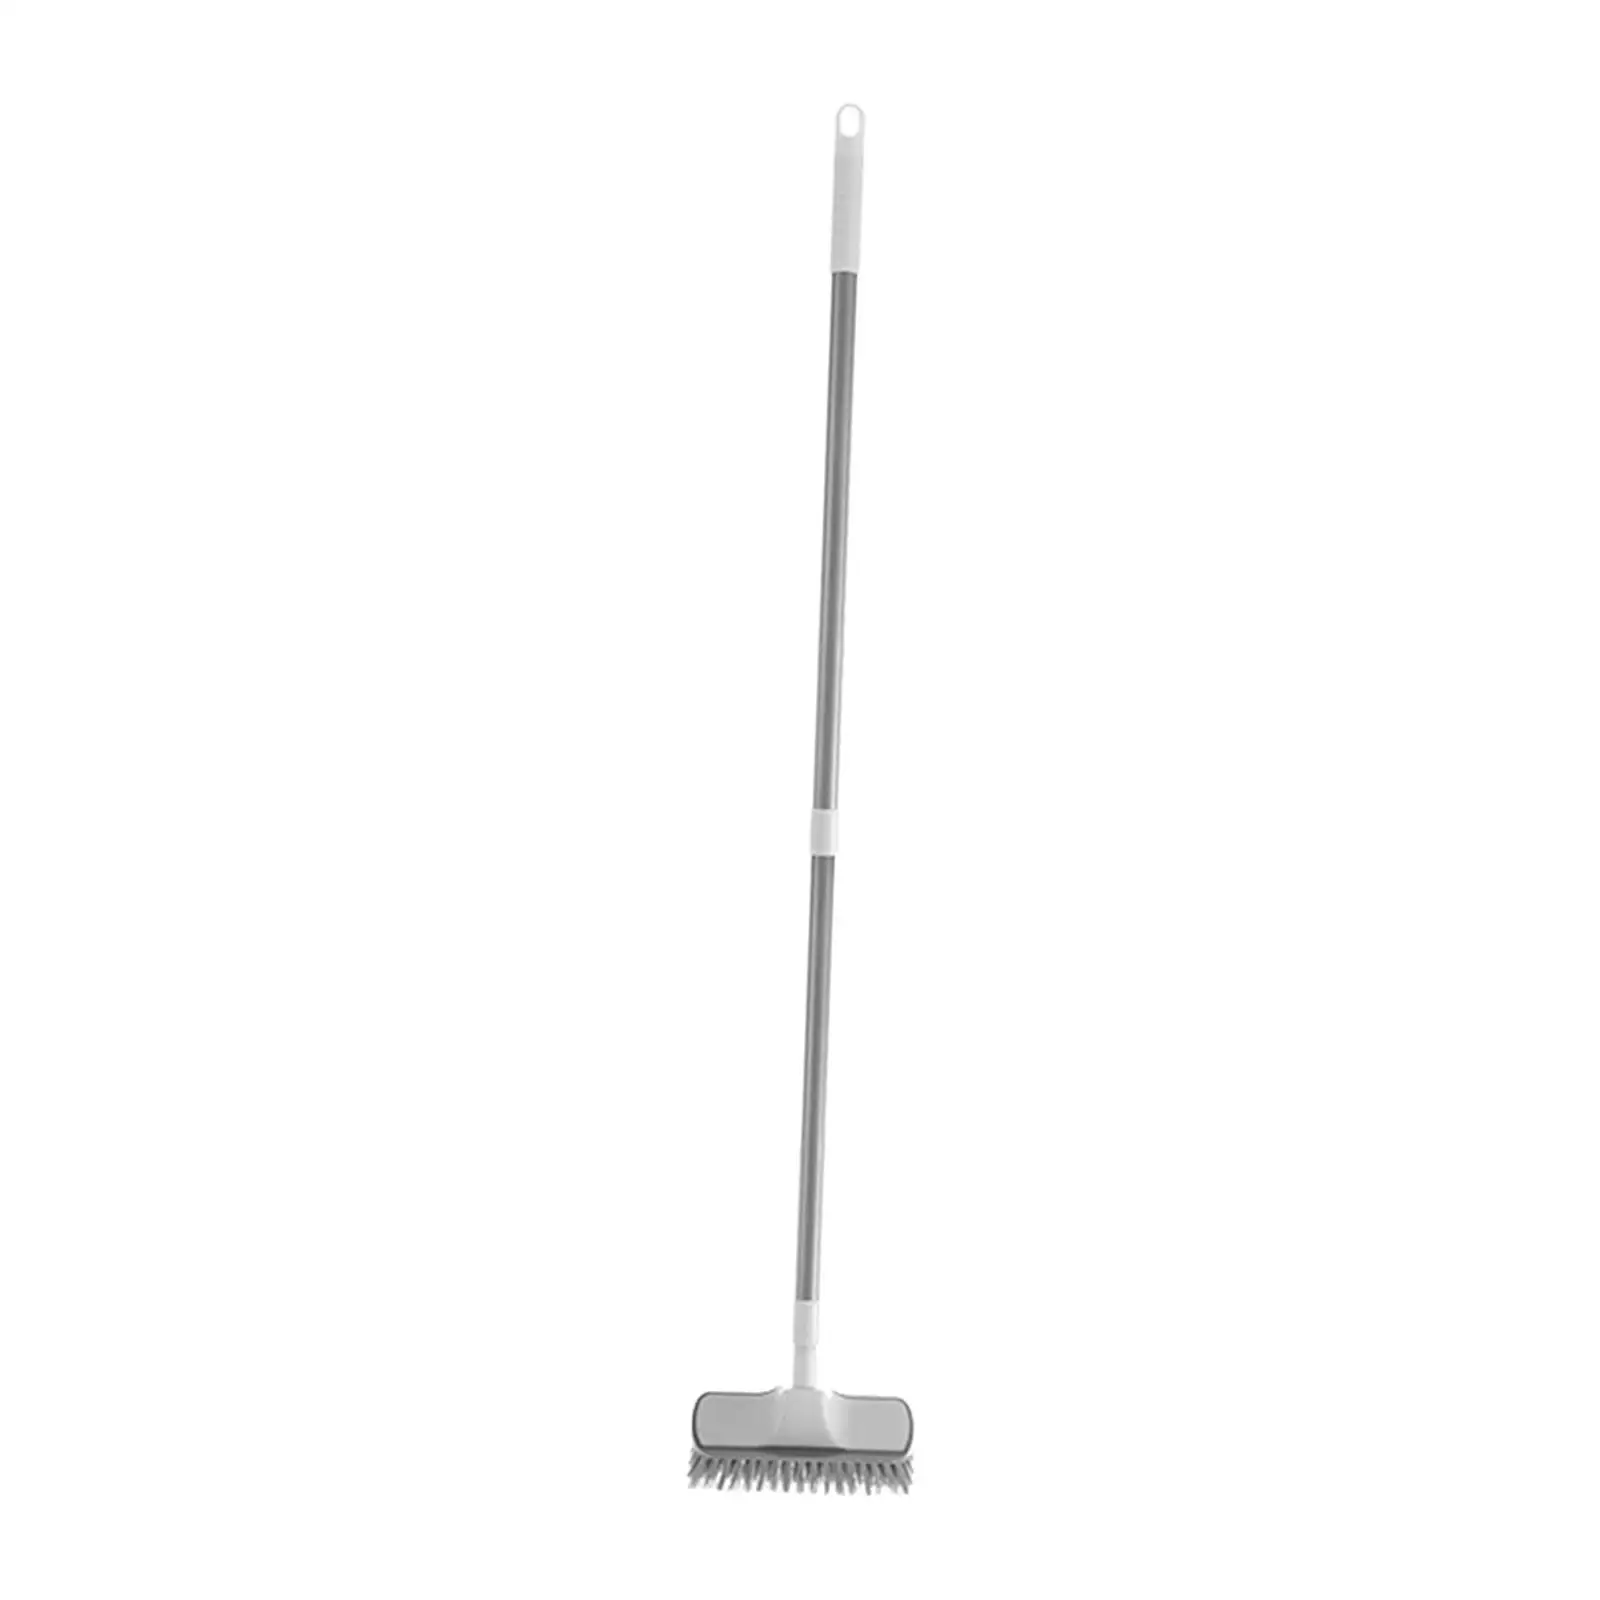 Bathroom Floor Scrubber Brush with Adjustable Long Handle Grout Cleaning Brush for Carpet Floor Office Garden Room